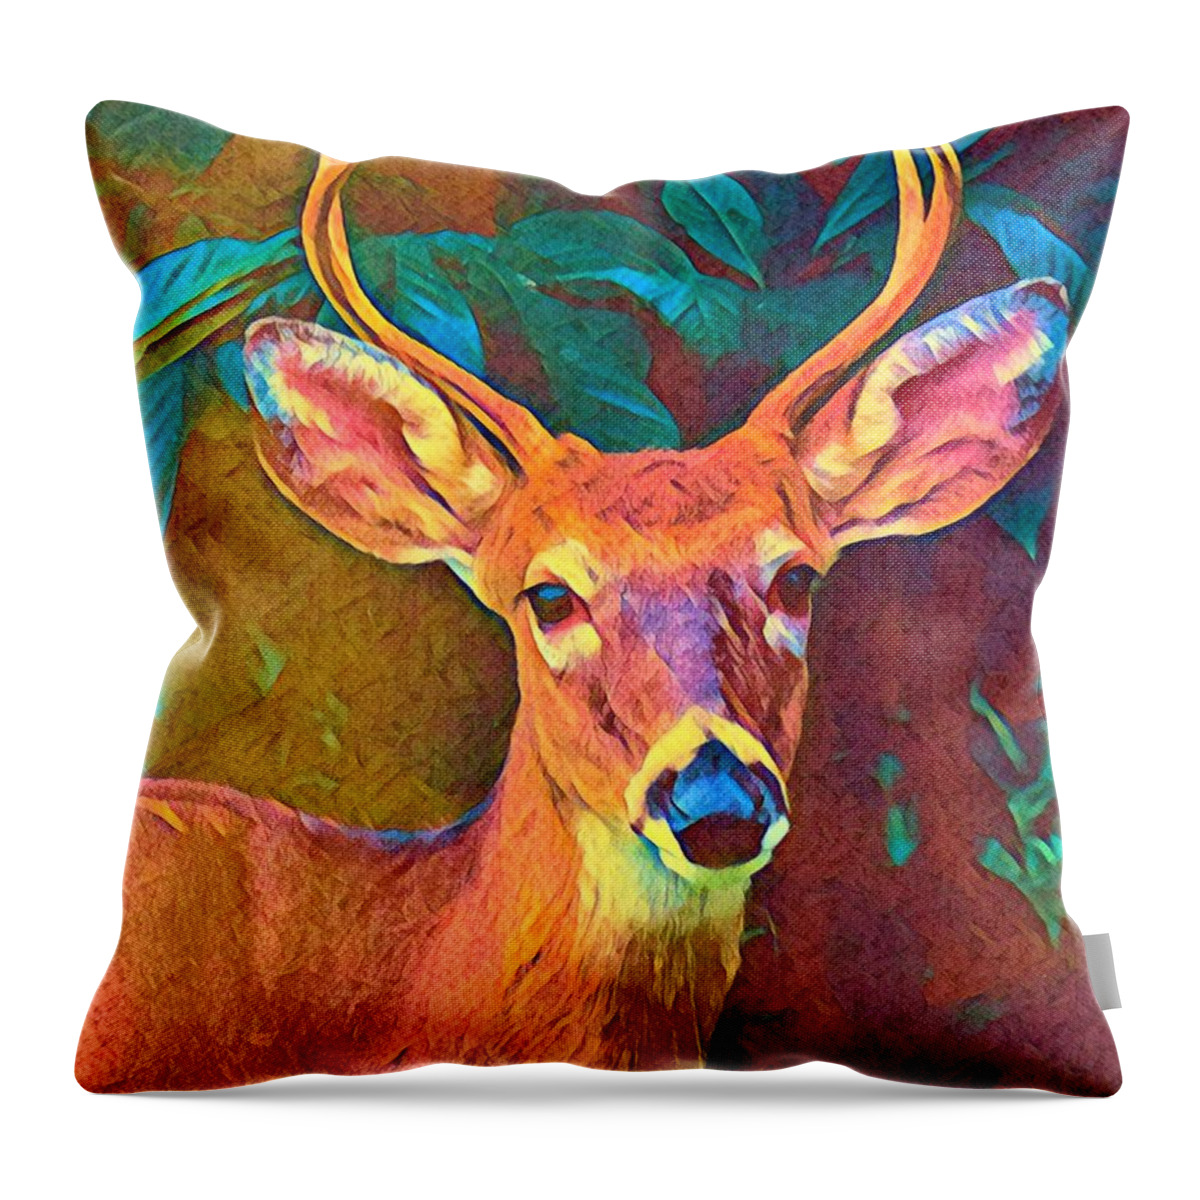 Majestic Throw Pillow featuring the painting Majesty by Juliette Becker